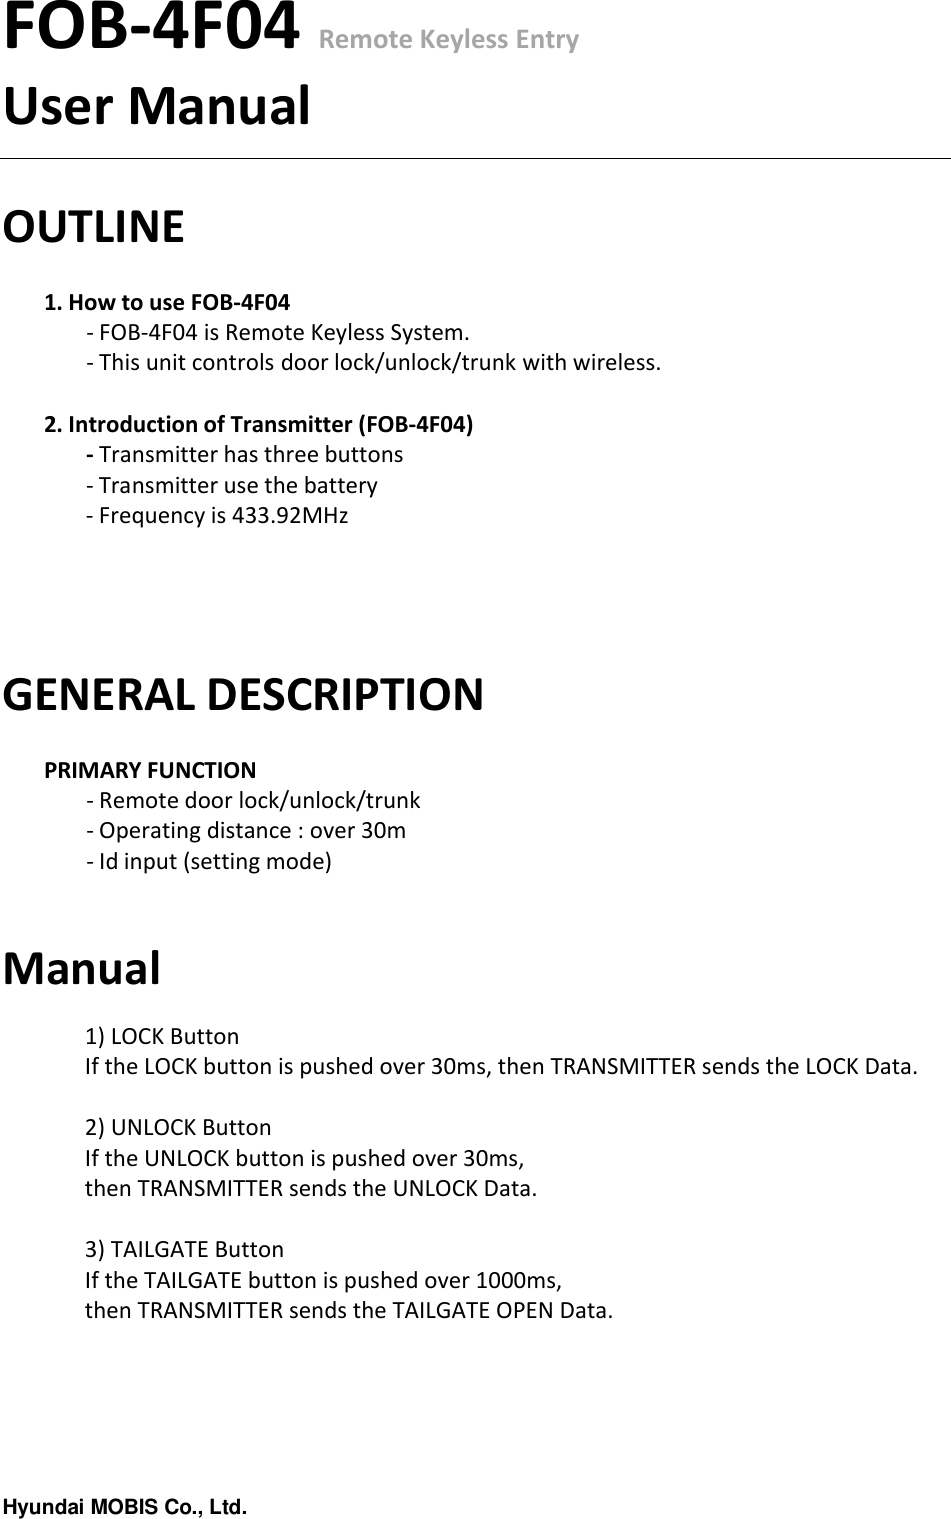 Hyundai MOBIS Co., Ltd.FOB-4F04 Remote Keyless EntryUser ManualOUTLINE1. How to use FOB-4F04- FOB-4F04 is Remote Keyless System.- This unit controls door lock/unlock/trunk with wireless.2. Introduction of Transmitter (FOB-4F04)- Transmitter has three buttons- Transmitter use the battery- Frequency is 433.92MHzGENERAL DESCRIPTIONPRIMARY FUNCTION- Remote door lock/unlock/trunk- Operating distance : over 30m - Id input (setting mode)Manual1) LOCK ButtonIf the LOCK button is pushed over 30ms, then TRANSMITTER sends the LOCK Data.2) UNLOCK ButtonIf the UNLOCK button is pushed over 30ms, then TRANSMITTER sends the UNLOCK Data.3) TAILGATE ButtonIf the TAILGATE button is pushed over 1000ms, then TRANSMITTER sends the TAILGATE OPEN Data.